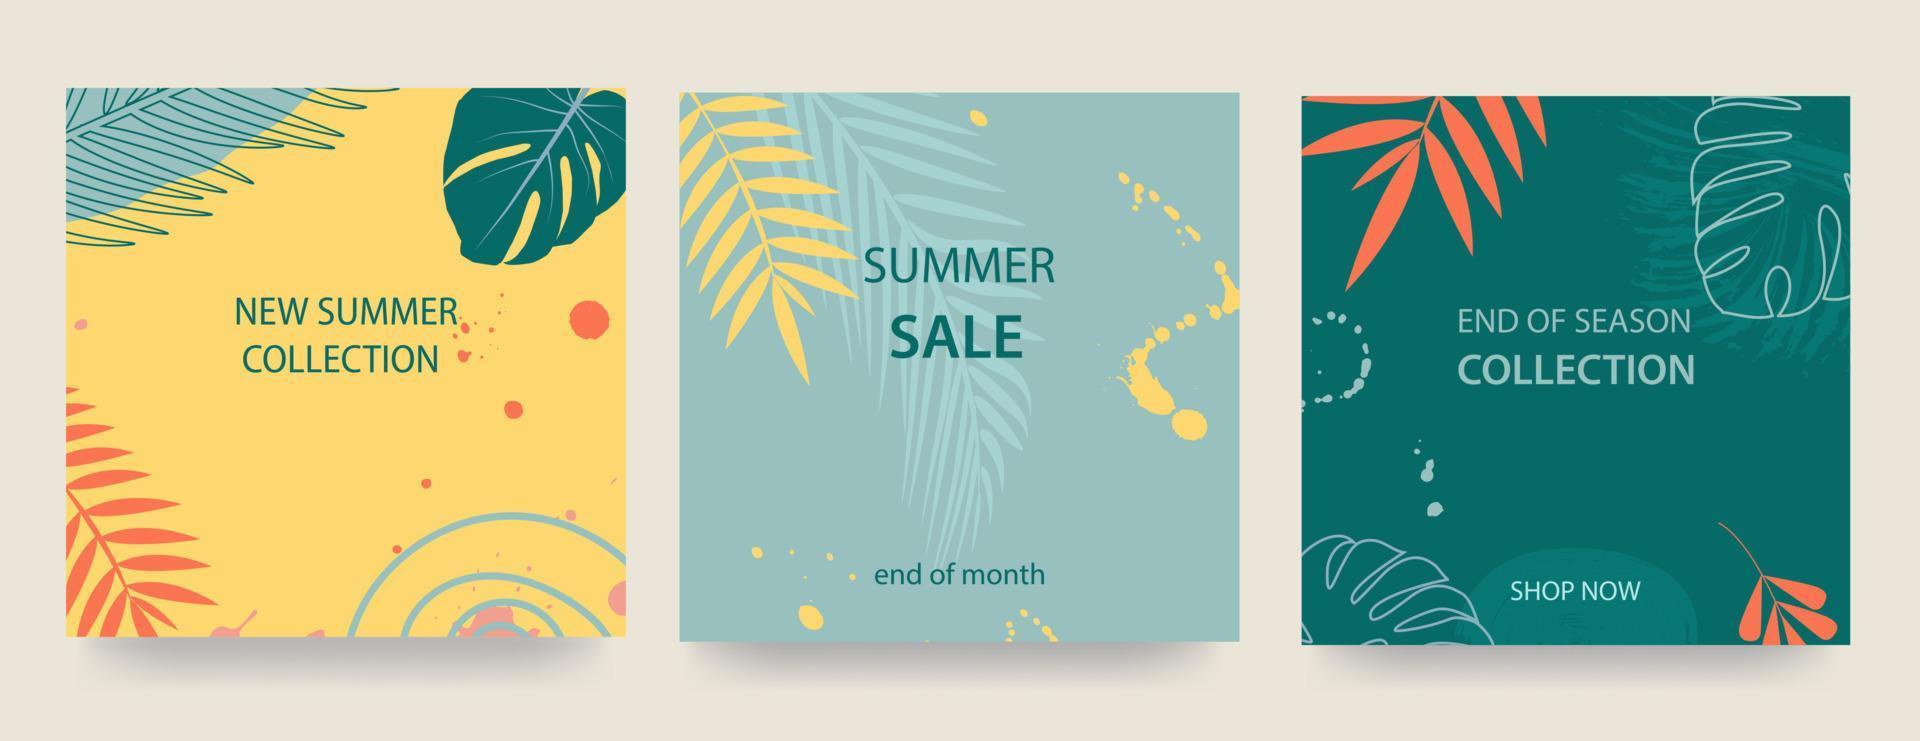 Set of advertising banners with tropical leaves, plants and spots. Announcement of a new collection, discounts on it, summer sale. Template for sale, advertising, internet. Vector illustration